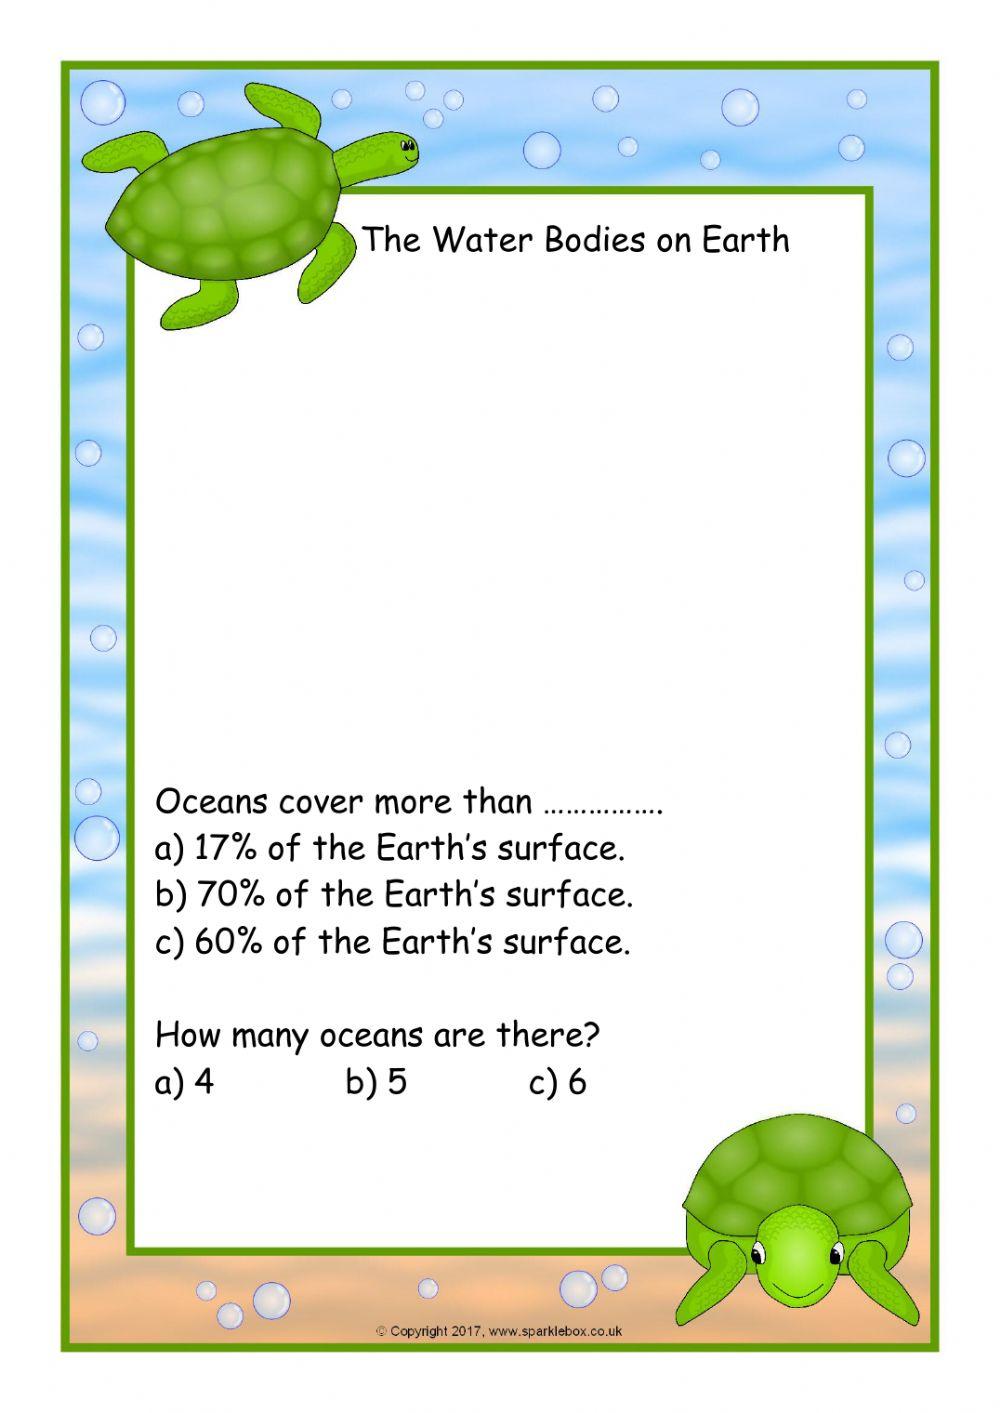 The Water Bodies